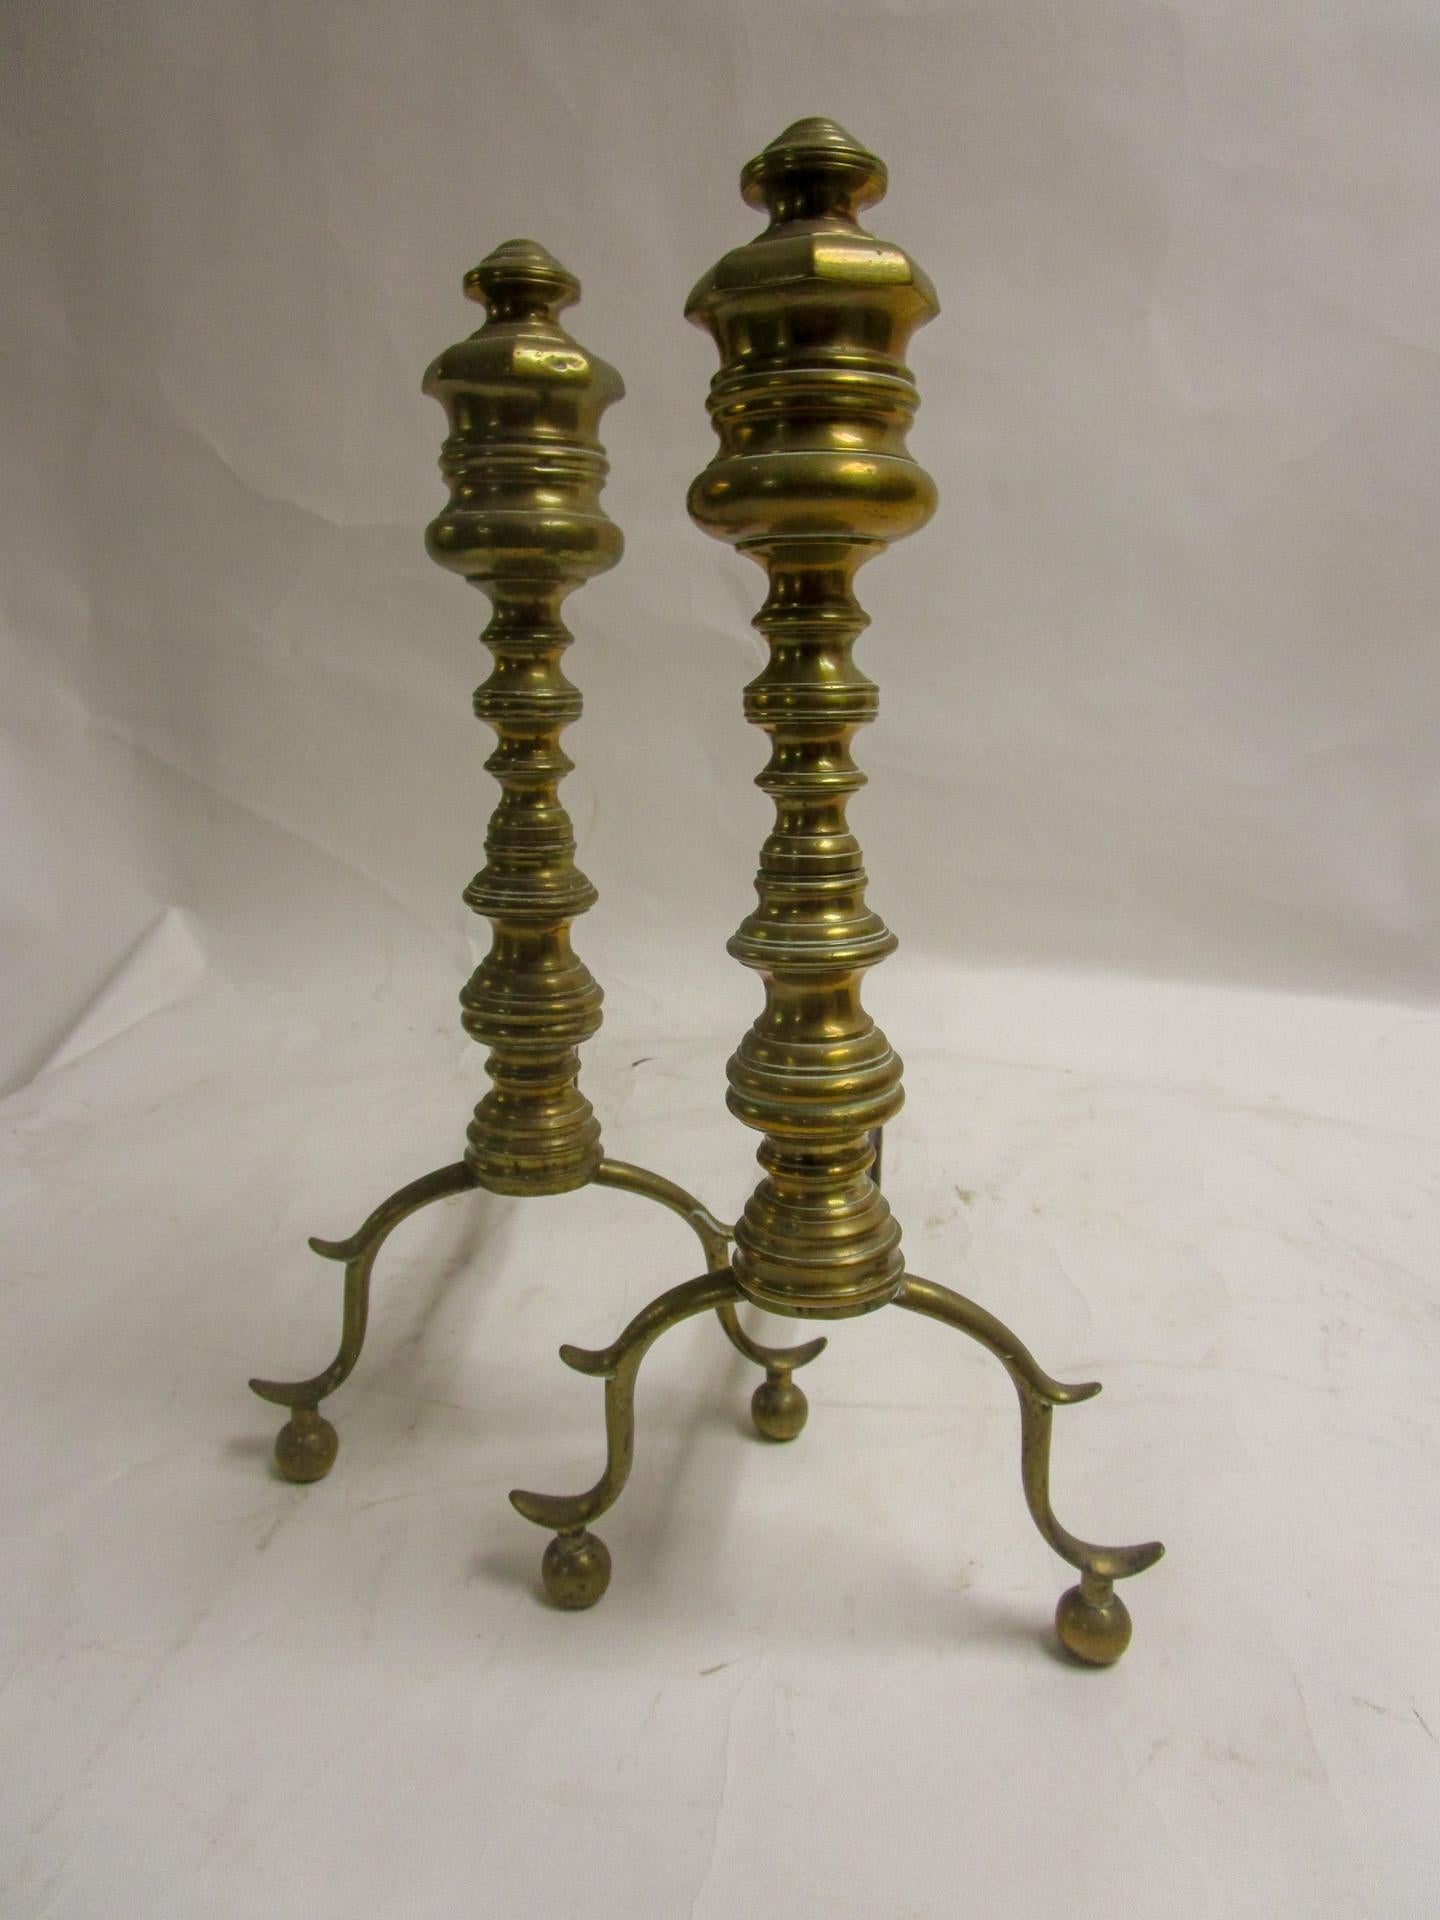 This classical pair of early 19th century English Regency andiron firedogs feature multiple turnings and perch delicately on ball feet. Very sturdy construction.